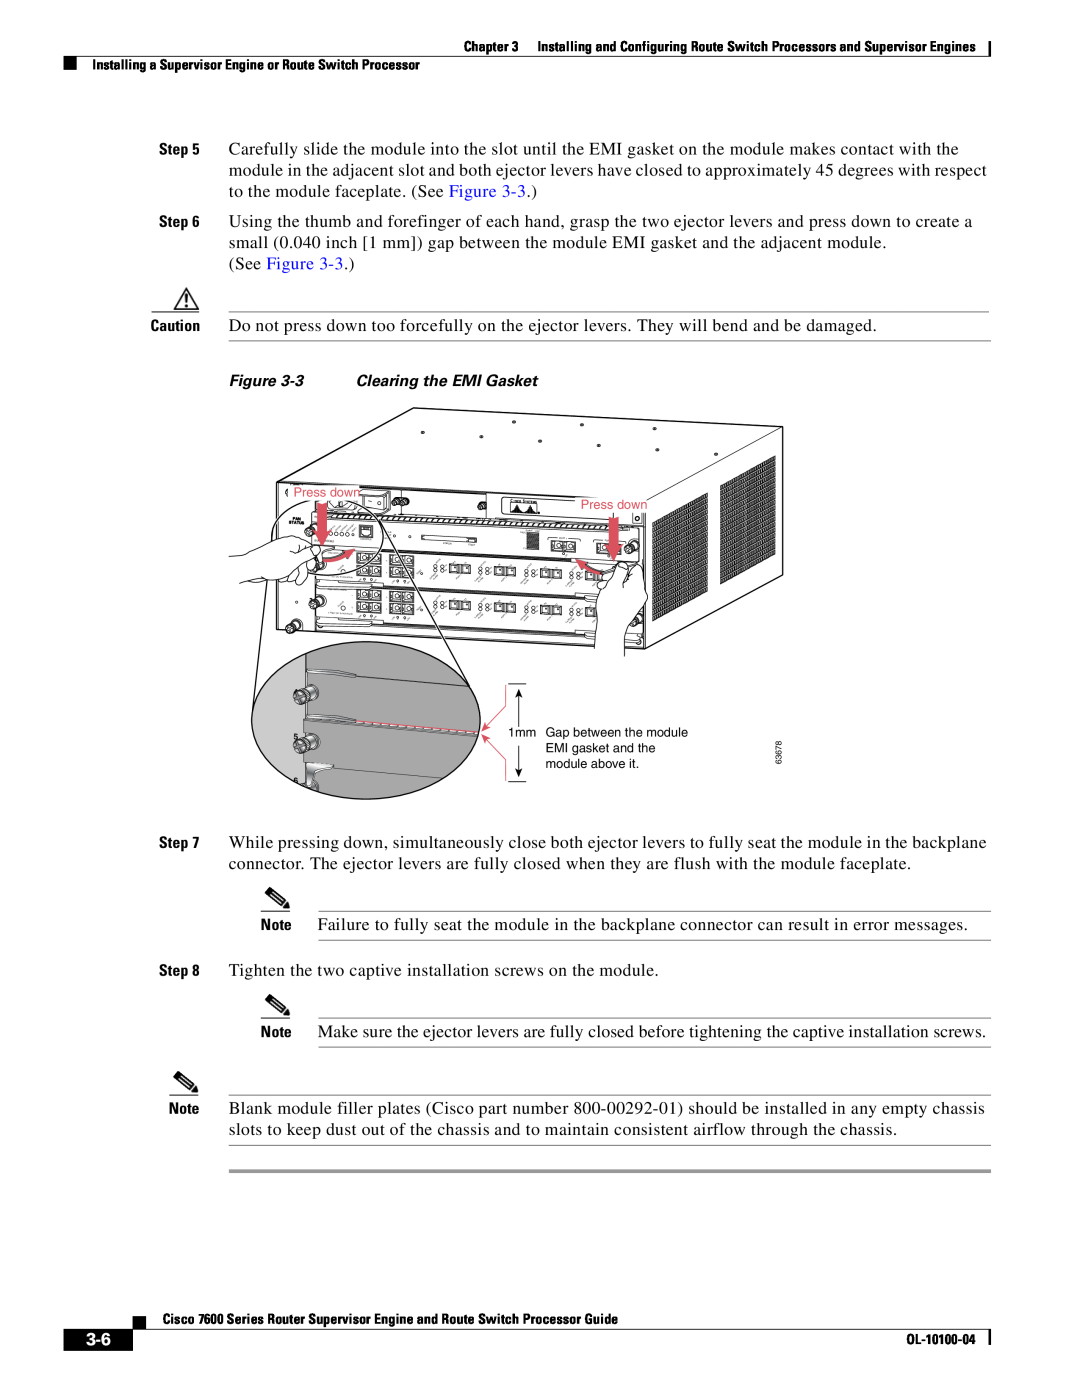 Cisco Systems 7600 manual See Figure, Tighten the two captive installation screws on the module 